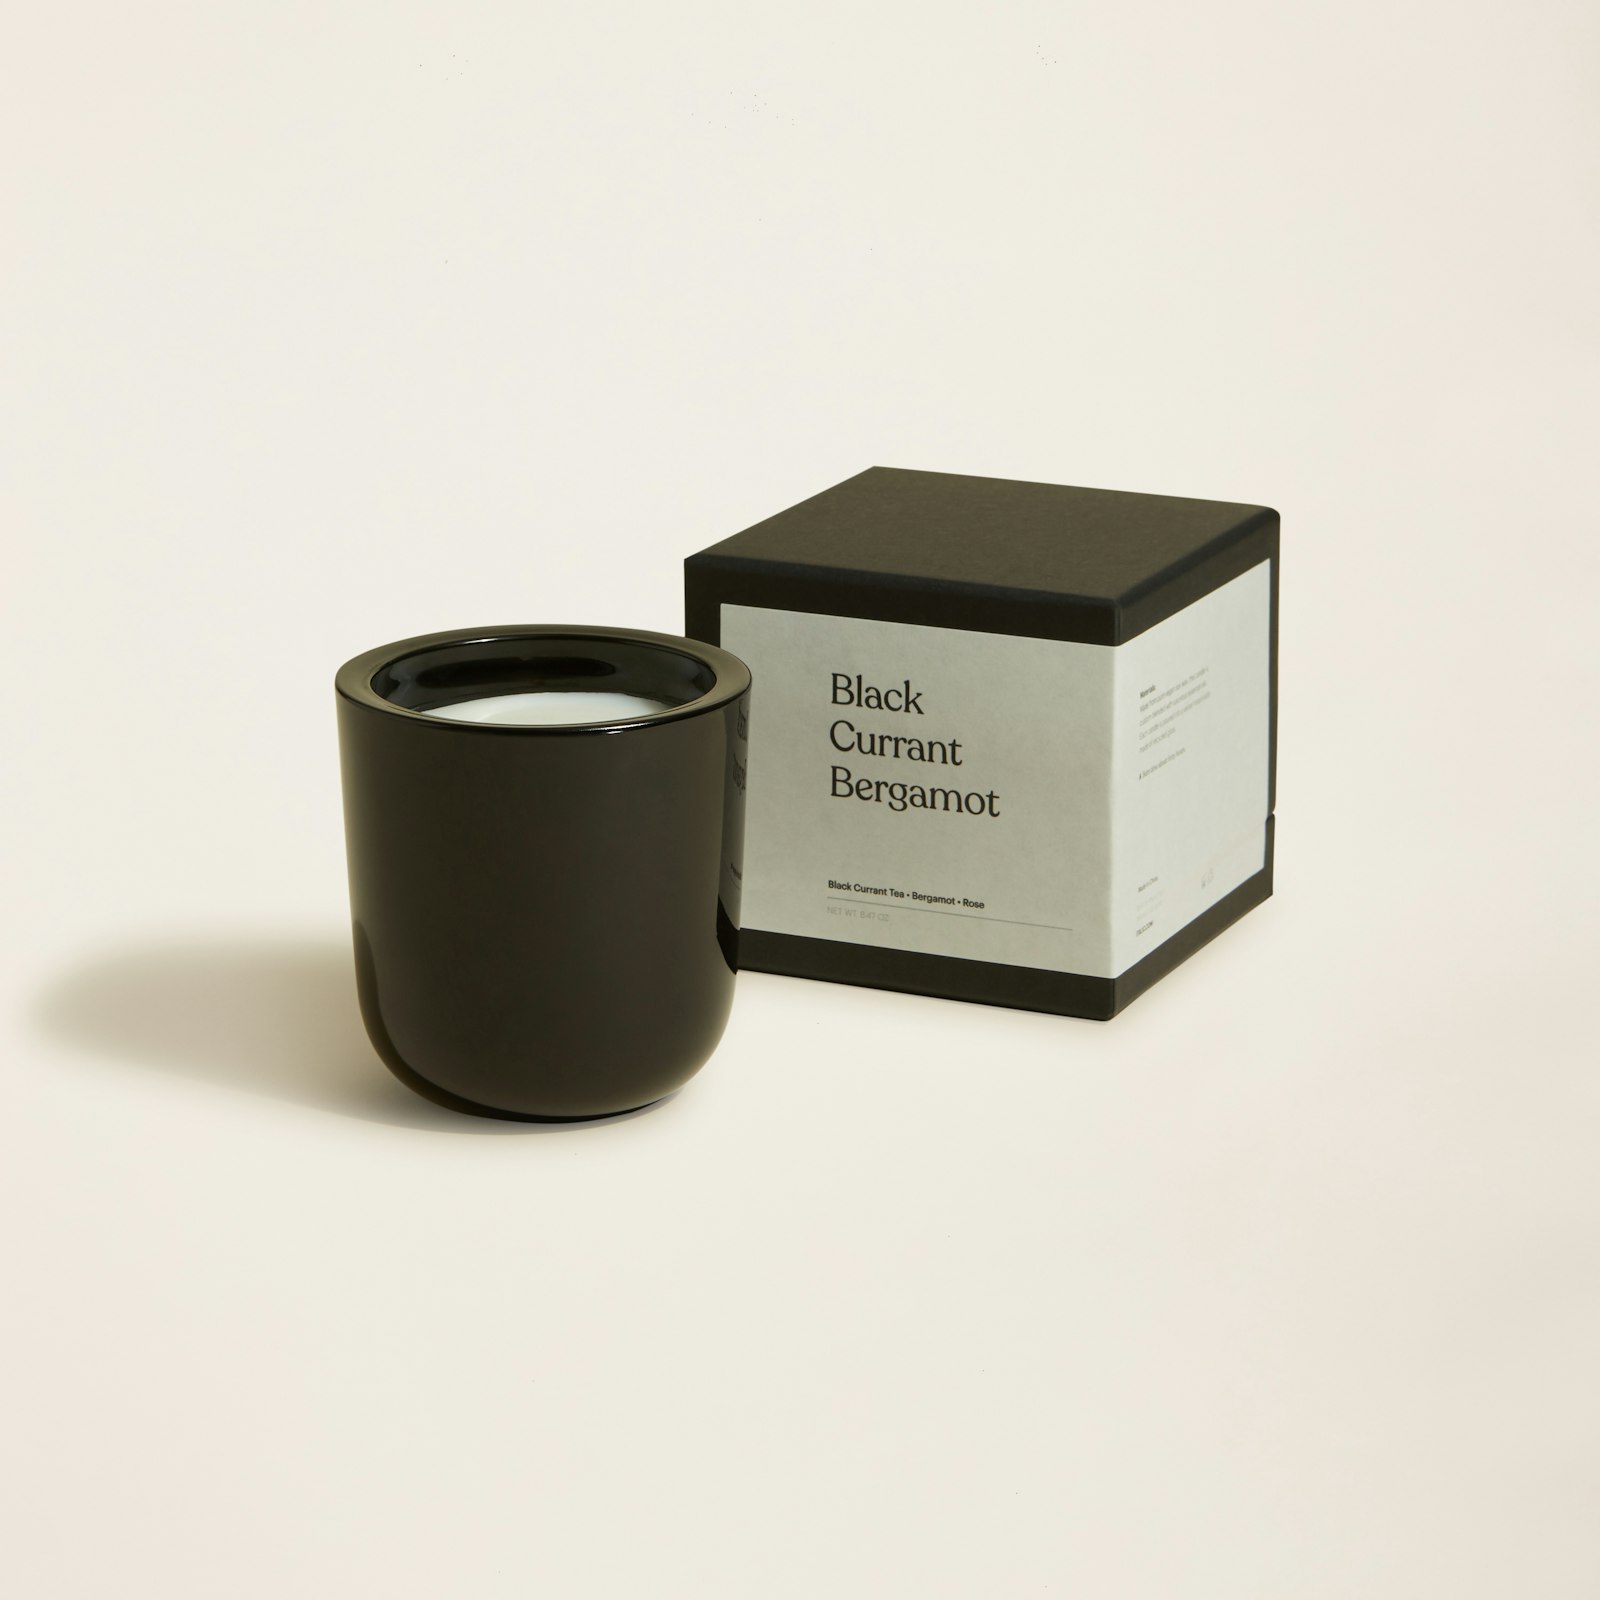 Black Currant Geranium Scented Candle_4x5_FrontwithBox_1.jpg